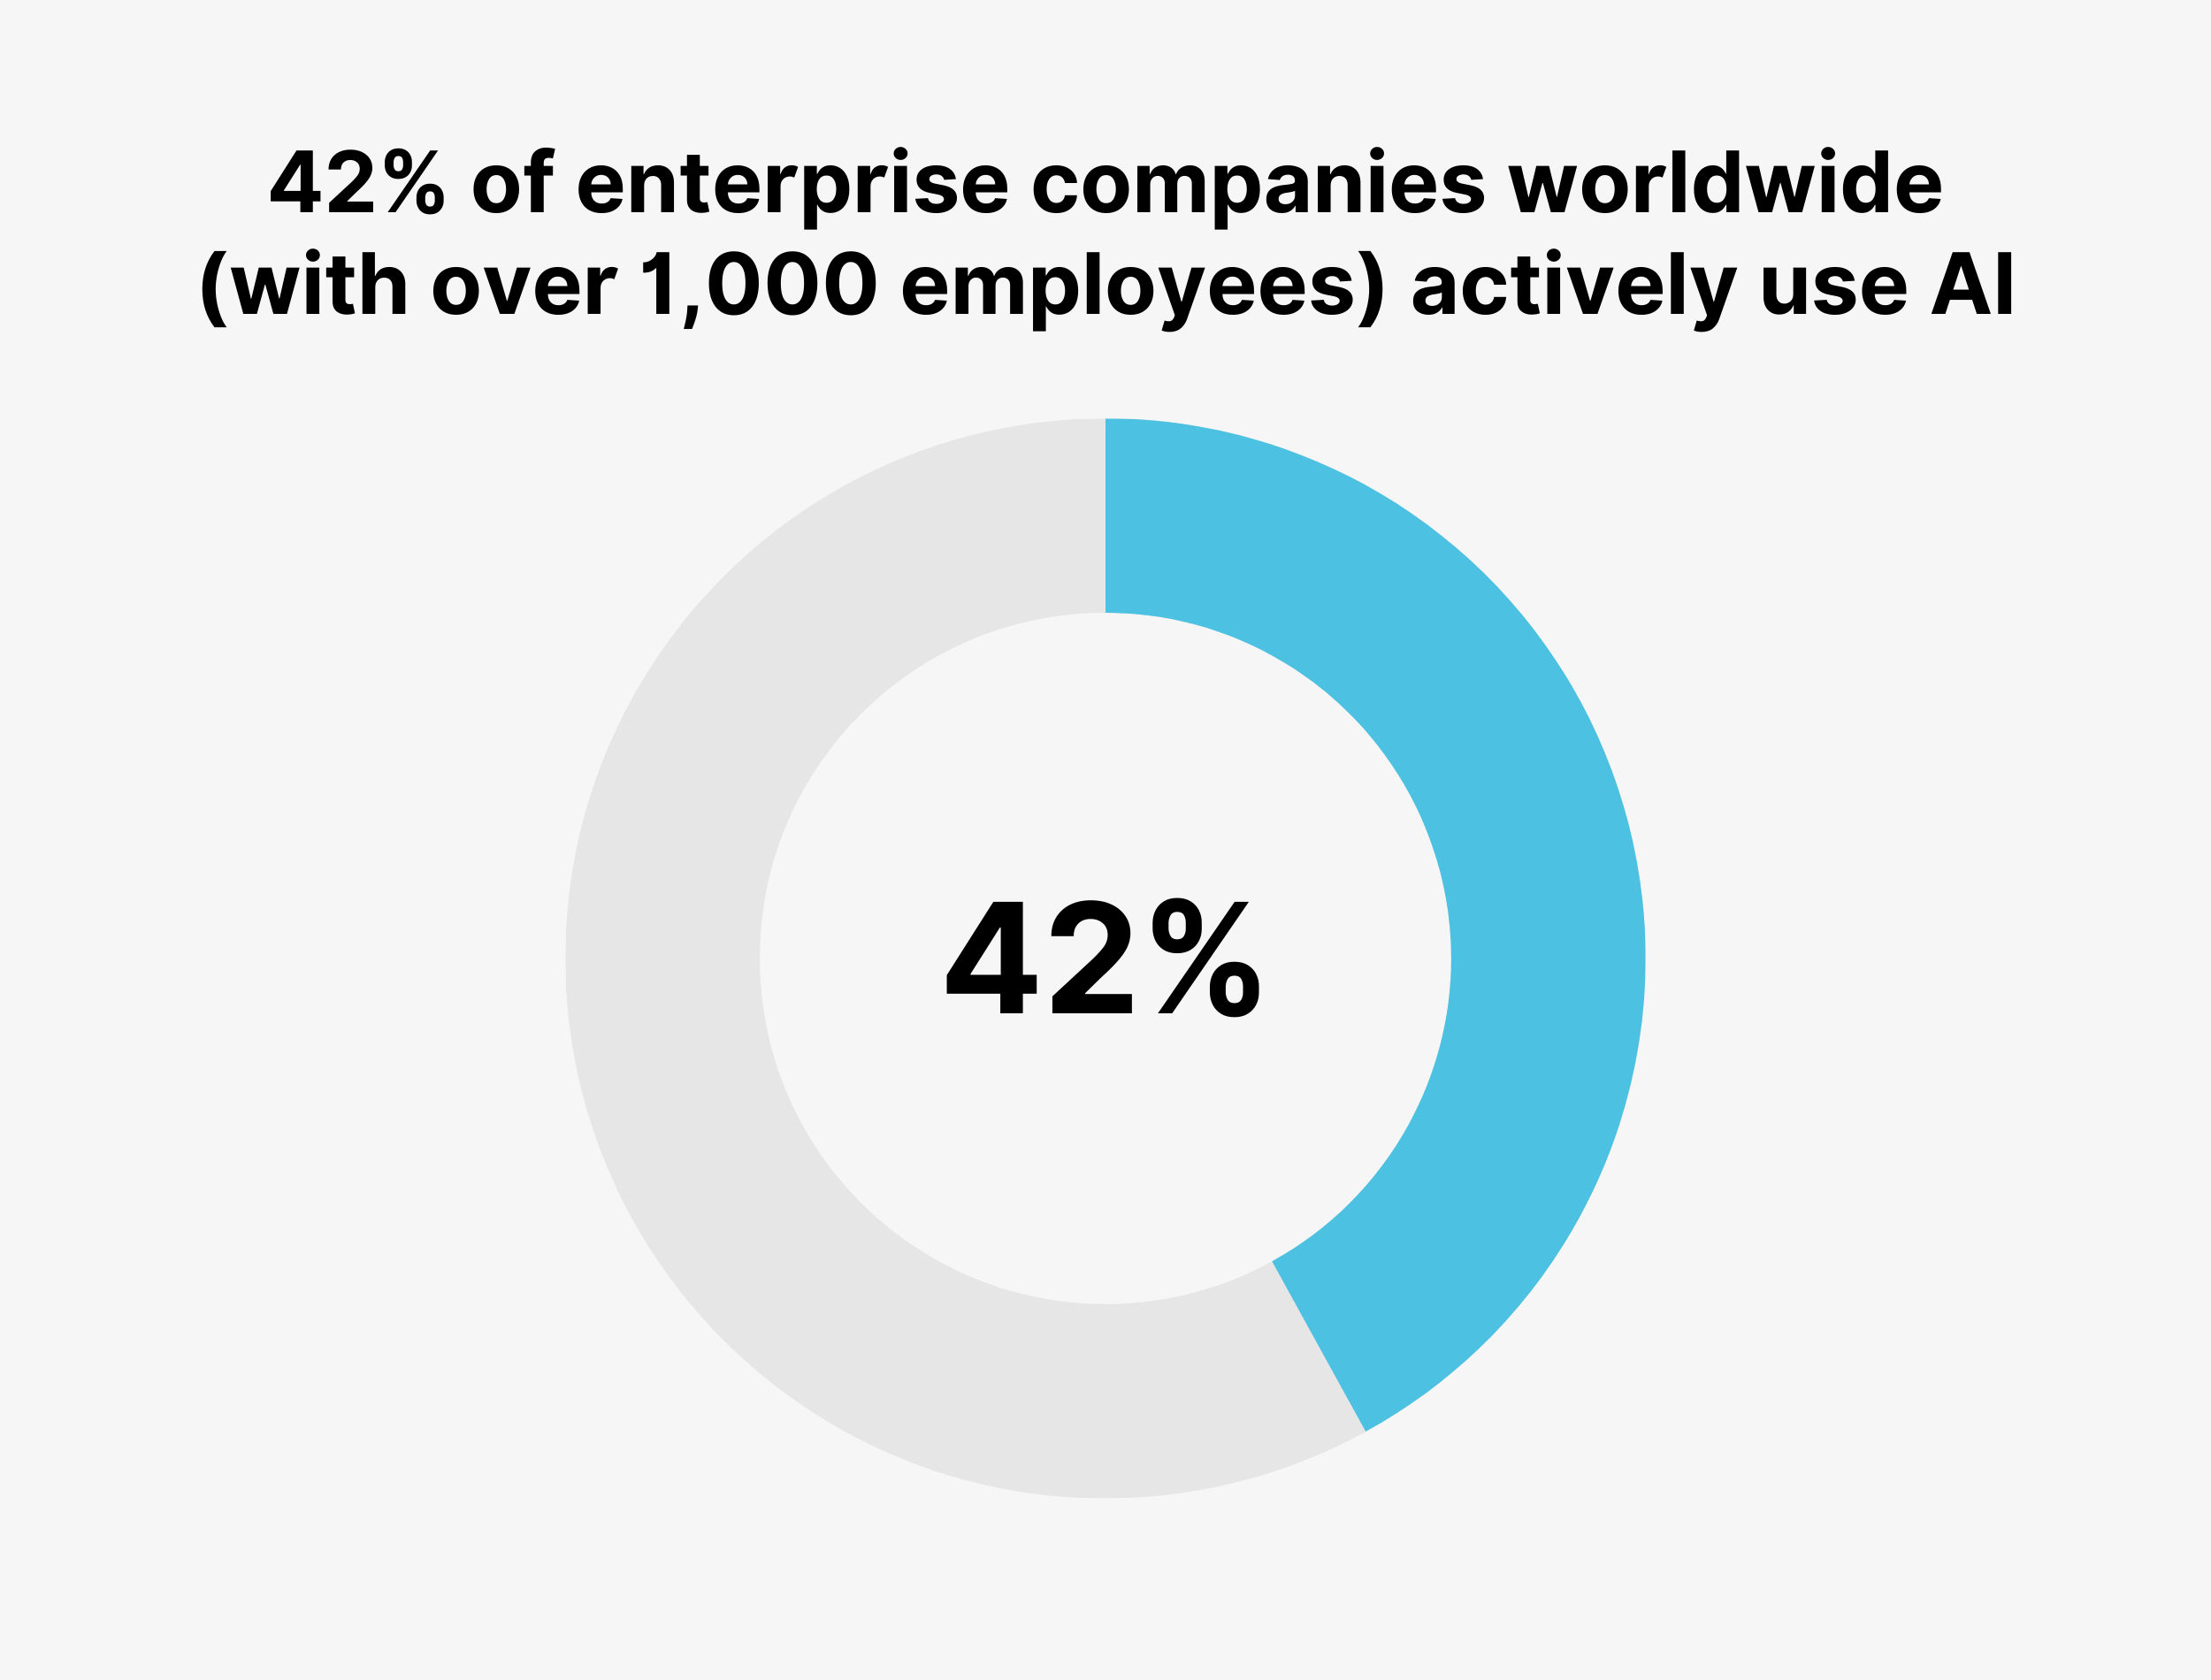 42% of enterprise companies worldwide (with over 1,000 employees) actively use AI